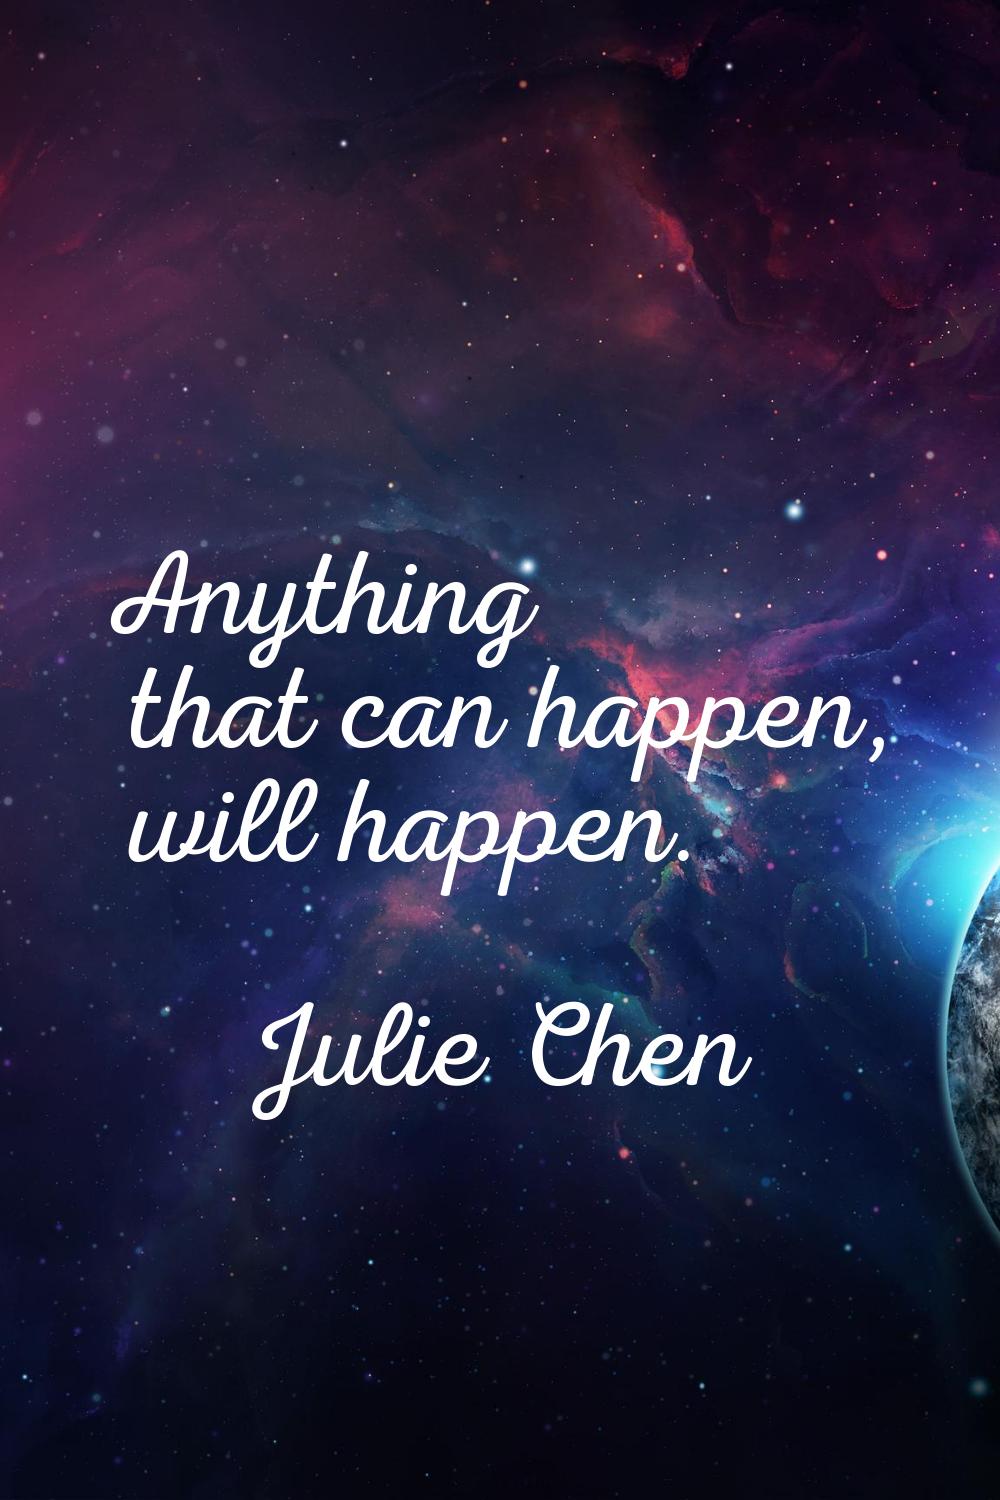 Anything that can happen, will happen.